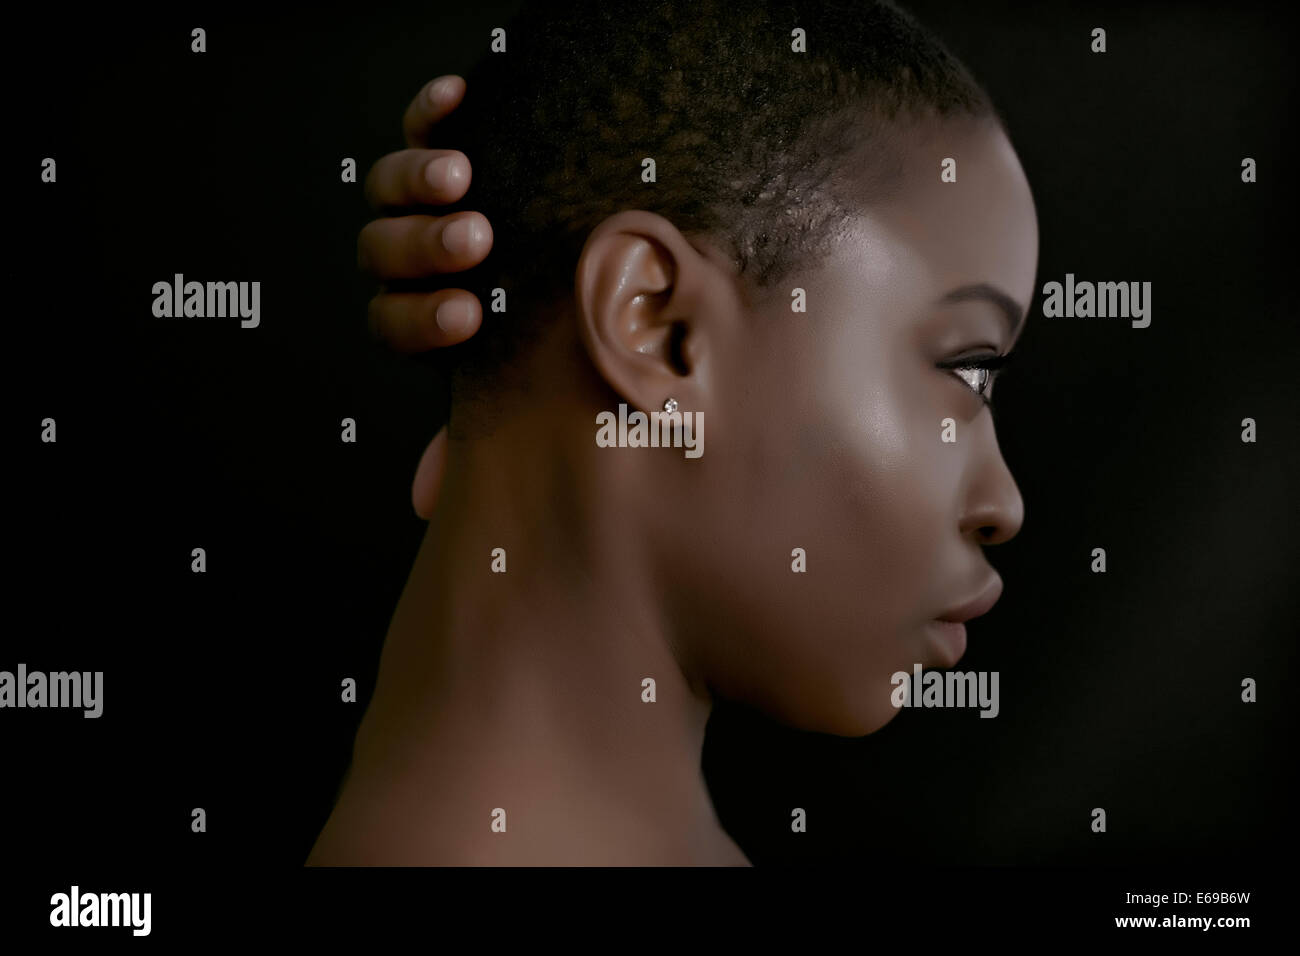 Black woman with hand behind head Stock Photo